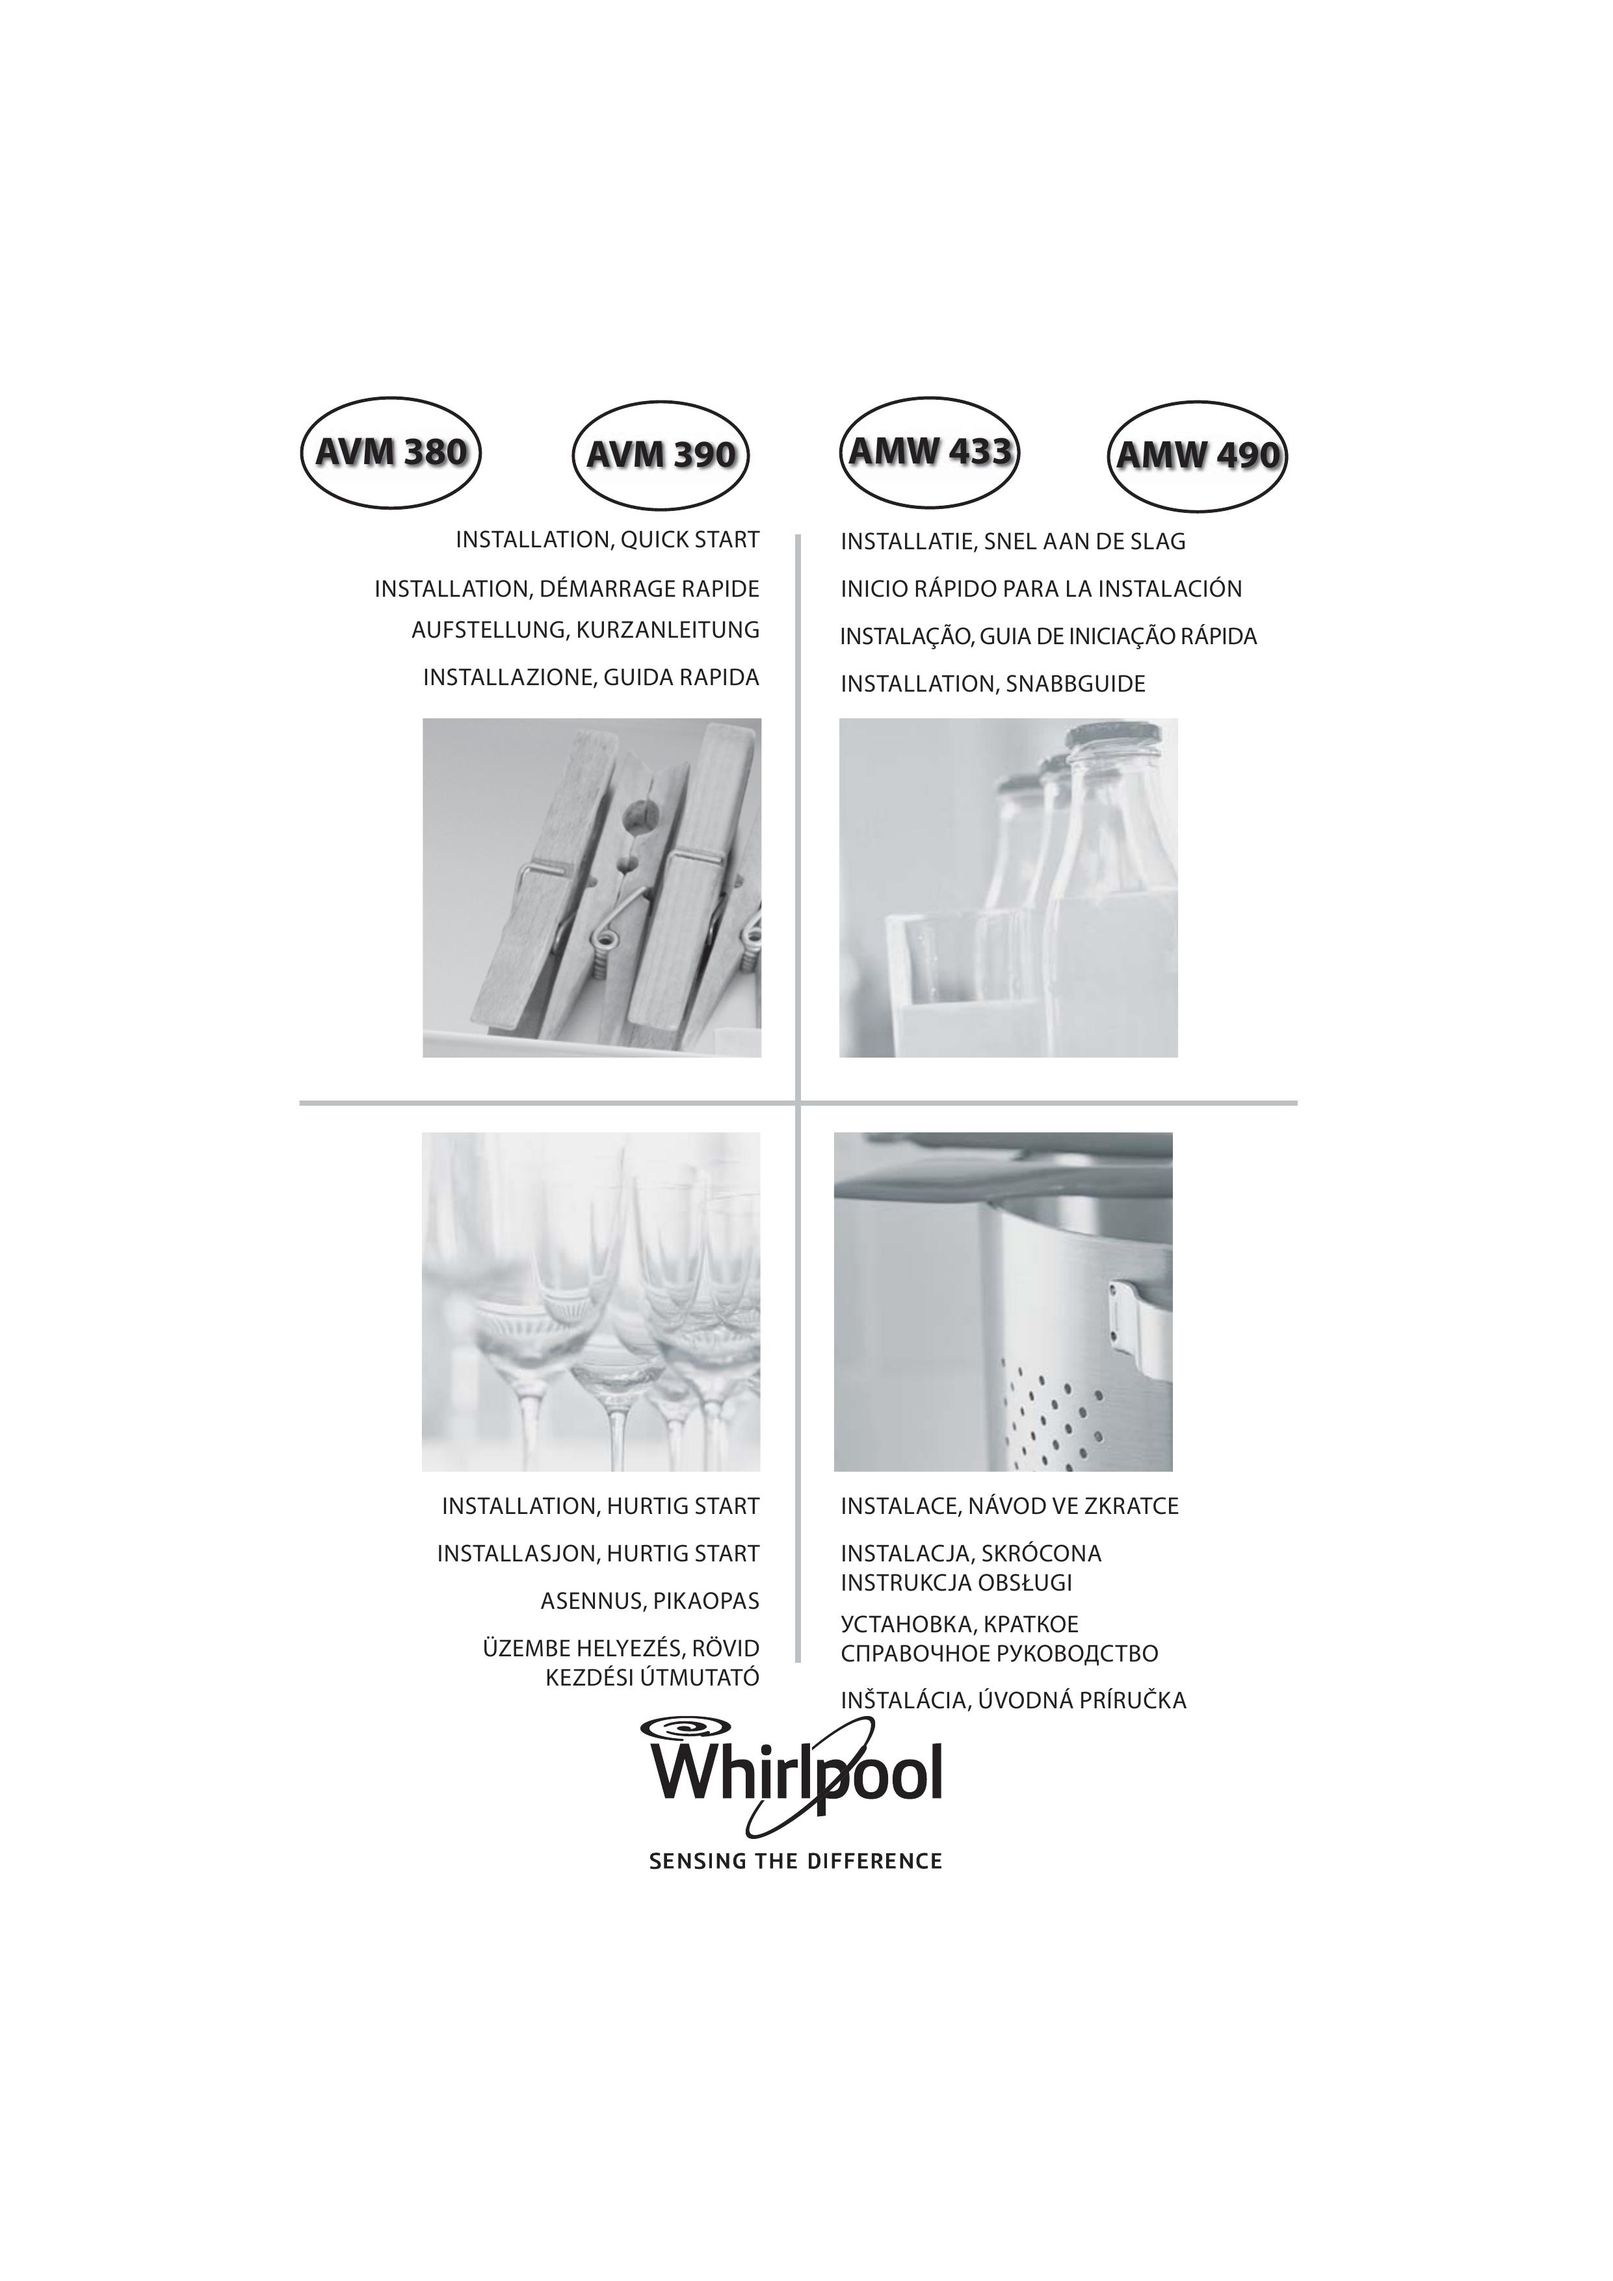 Whirlpool AMW 490 Oven Accessories User Manual